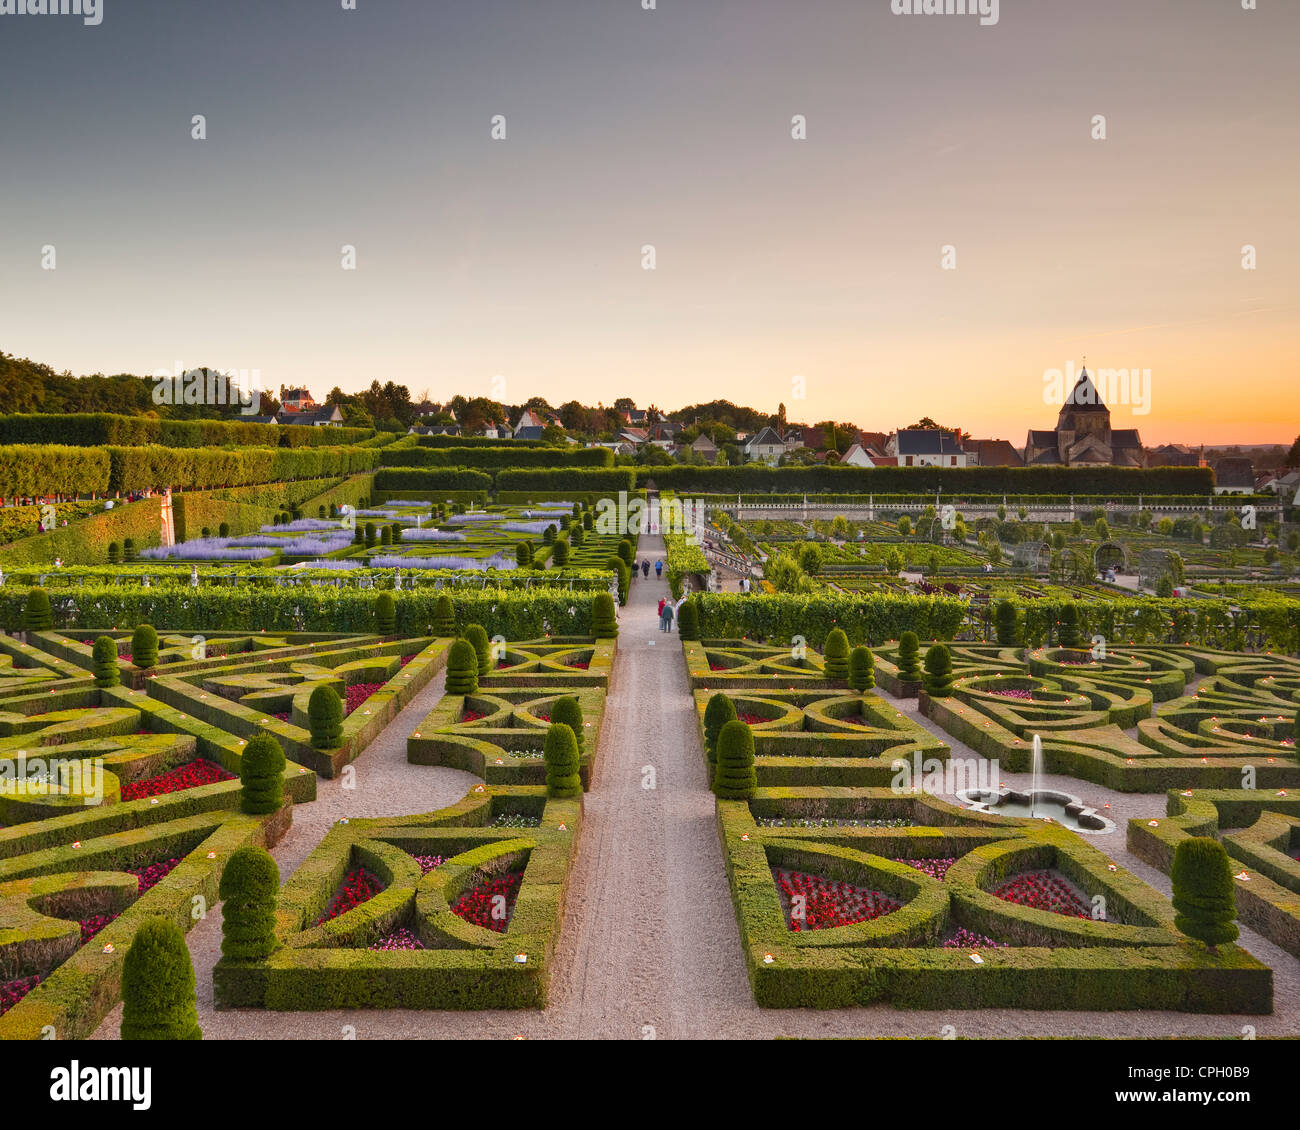 The chateau and gardens of Villandry in the historic Loire Valley during sunset. Stock Photo